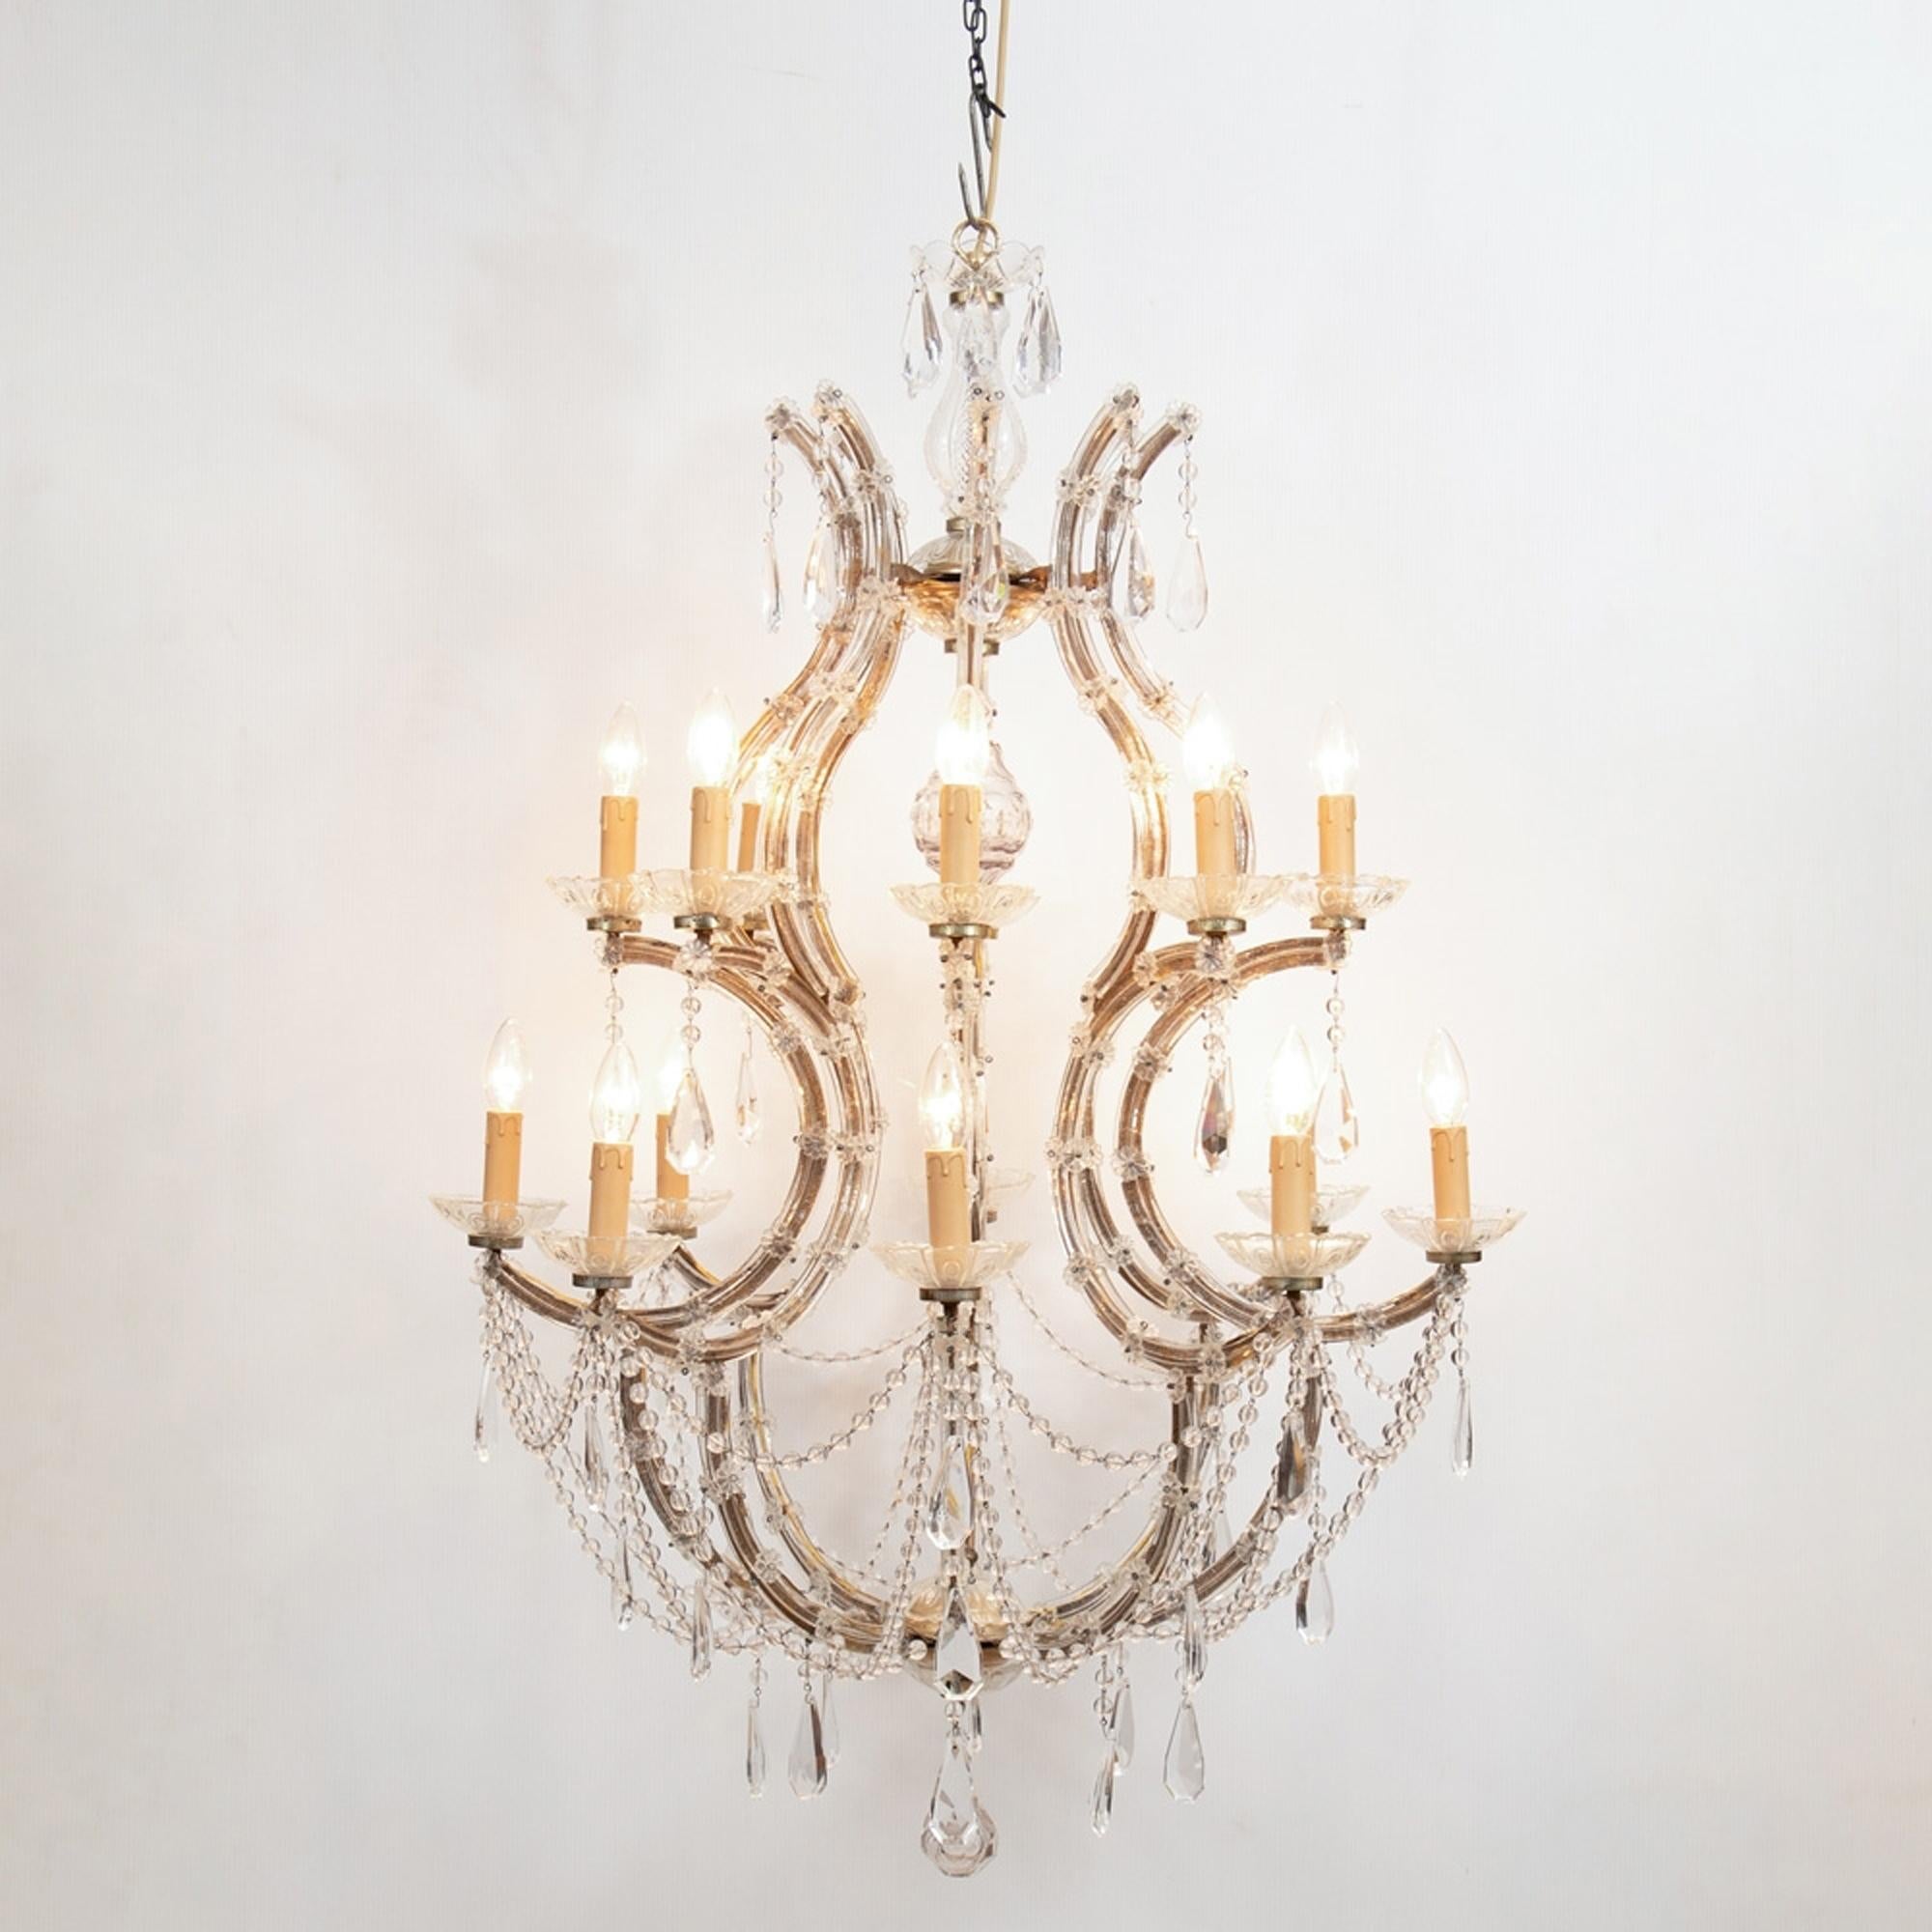 A large 12 branch, two-tier birdcage Maria Theresa chandelier, circa 1940-1950, French. The chandelier has been completely rewired to British Standard and professionally cleaned.